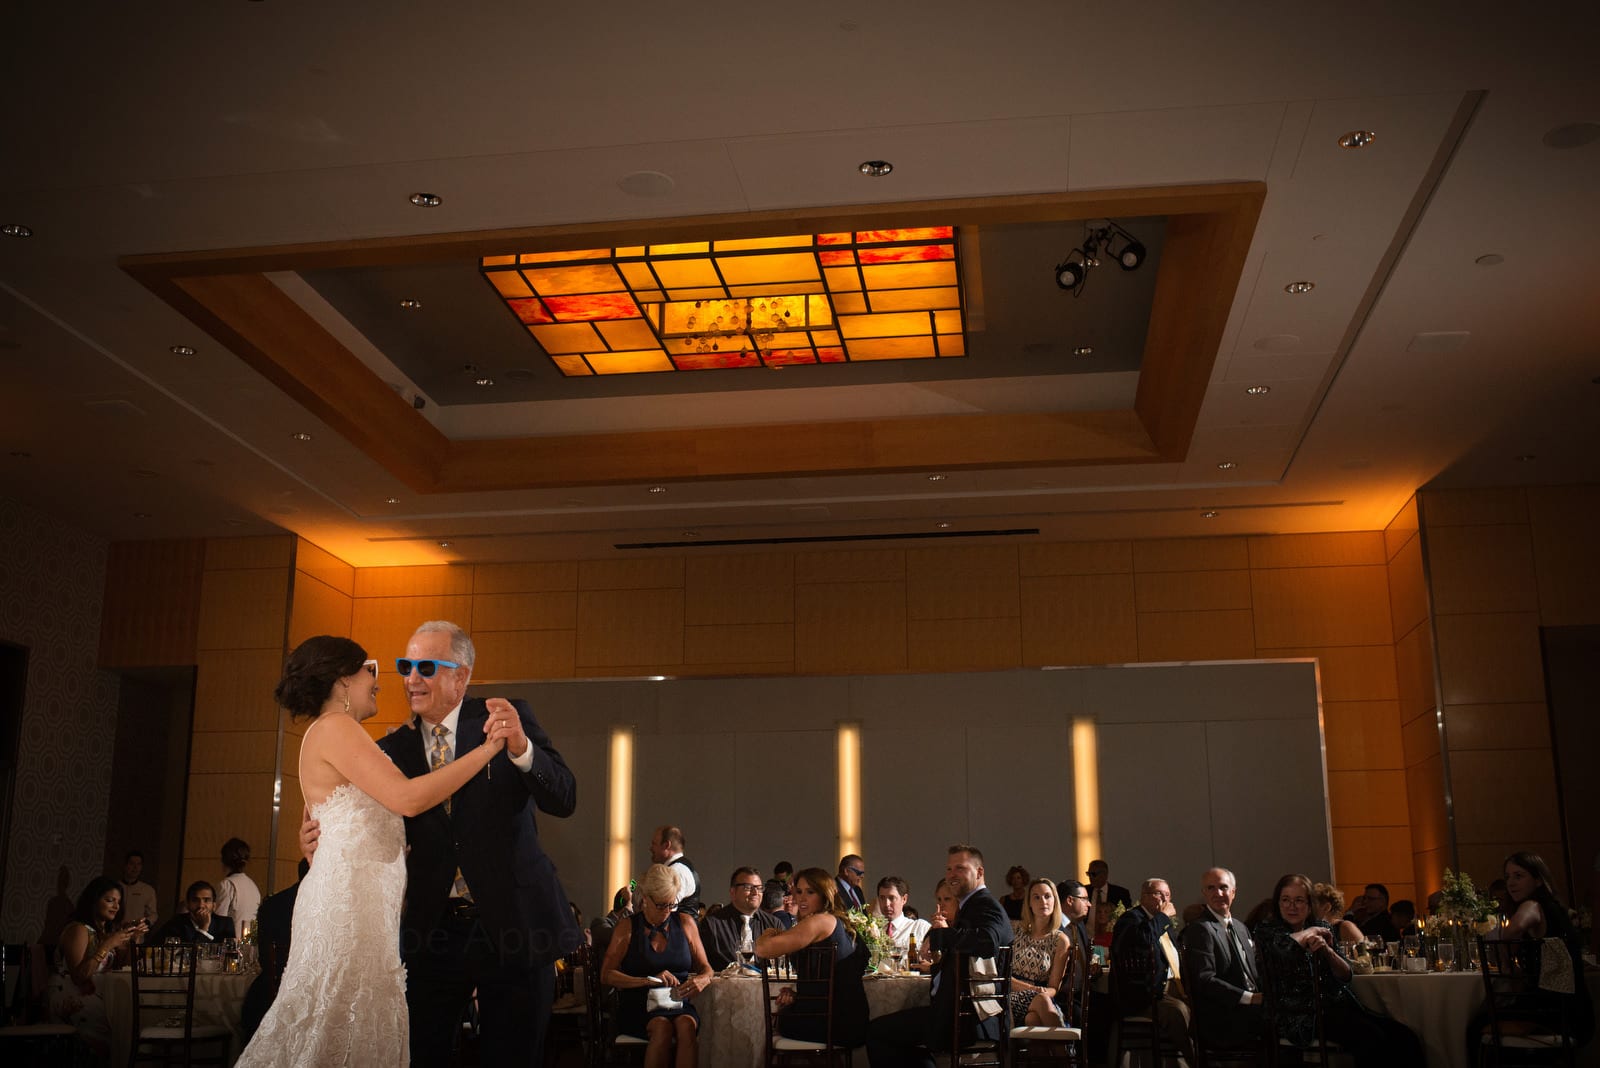 A bride and her father wear sunglasses as they dance beneath an orange and red stained glass chandelier while the guests look on Wedding Photography at Fairmont Hotel Pittsburgh.